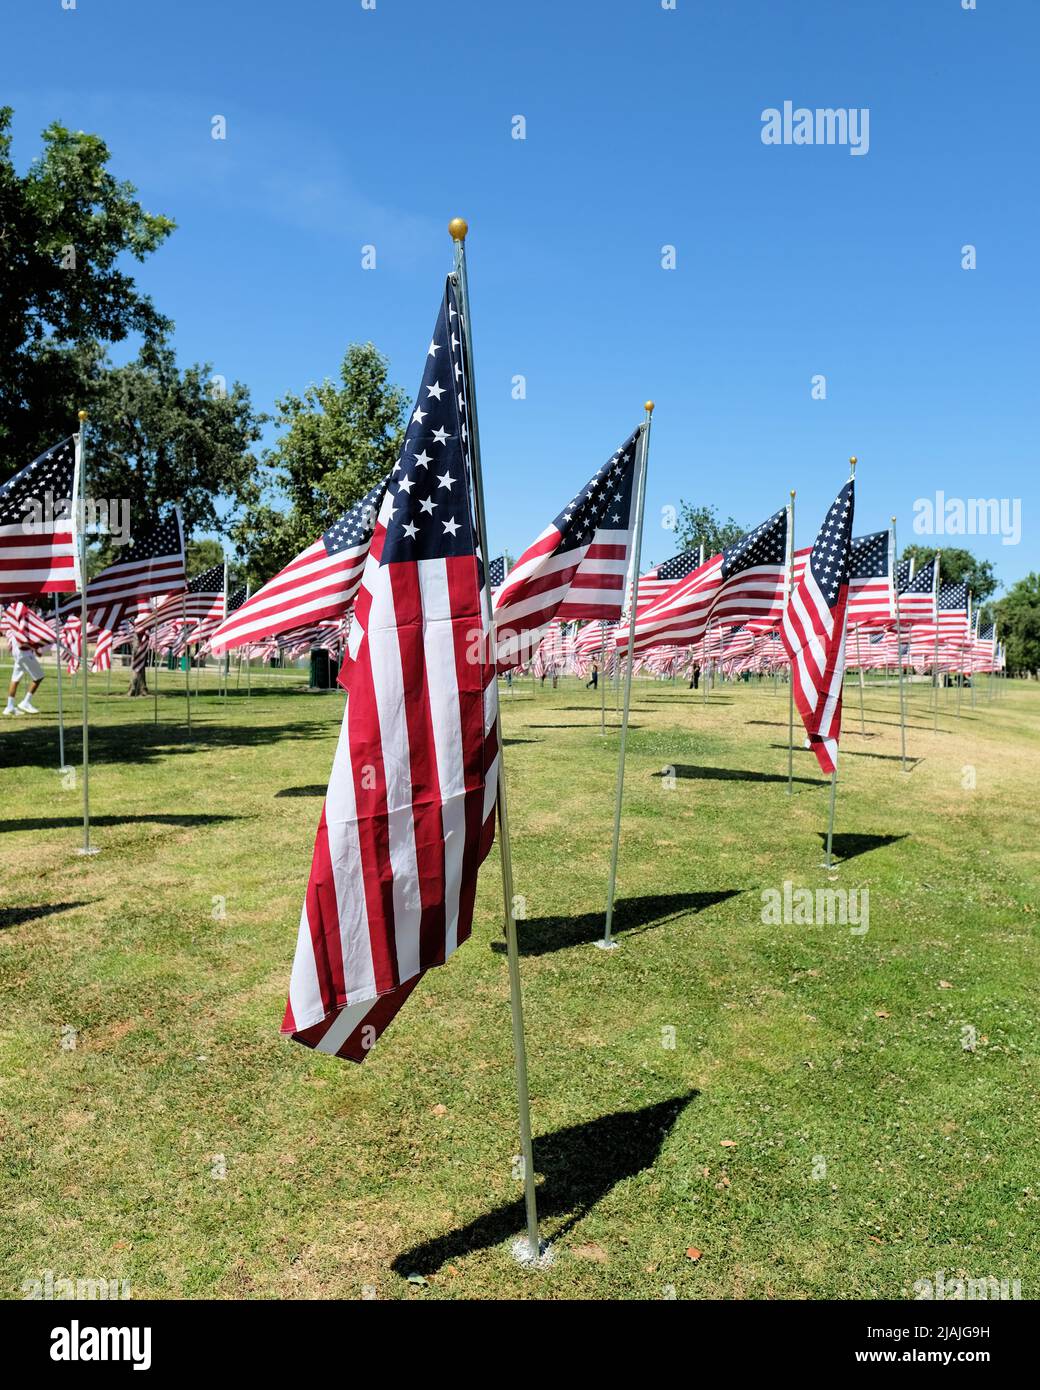 United States flags at a park celebrating a national patriotic holiday: Memorial Day, Veteran's Day, Flag Day, President's Day, Independence Day. Stock Photo